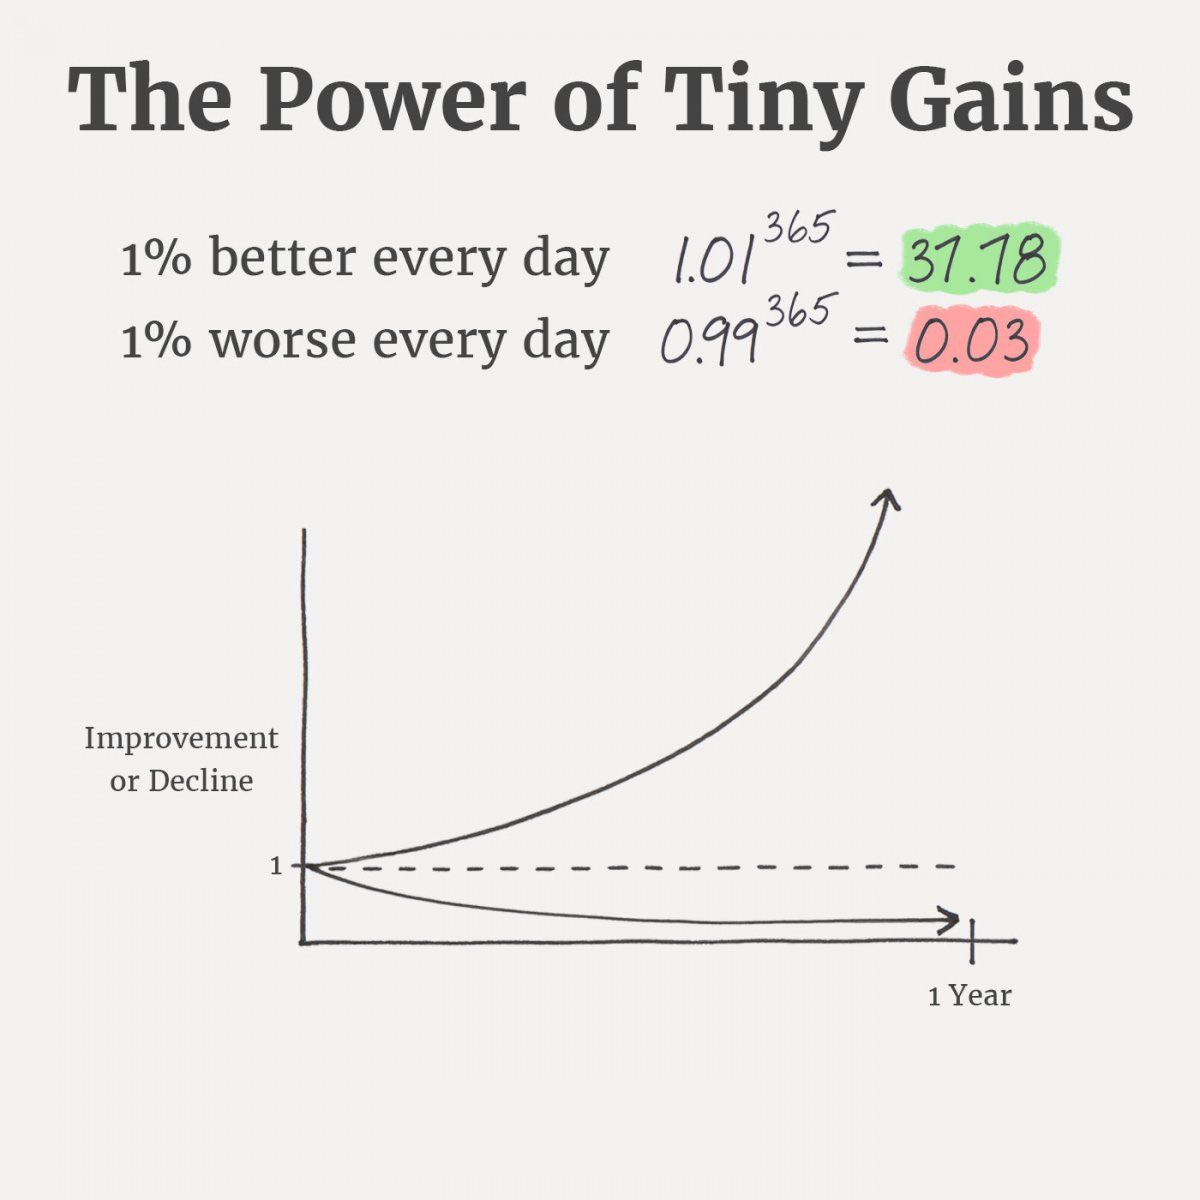 Hemant Parikh on X The Power of Tiny Gains 1 better every day 101 x 365   3778 1 worse every day 099 x 365  003 httpstcoiUStIaXabj  X